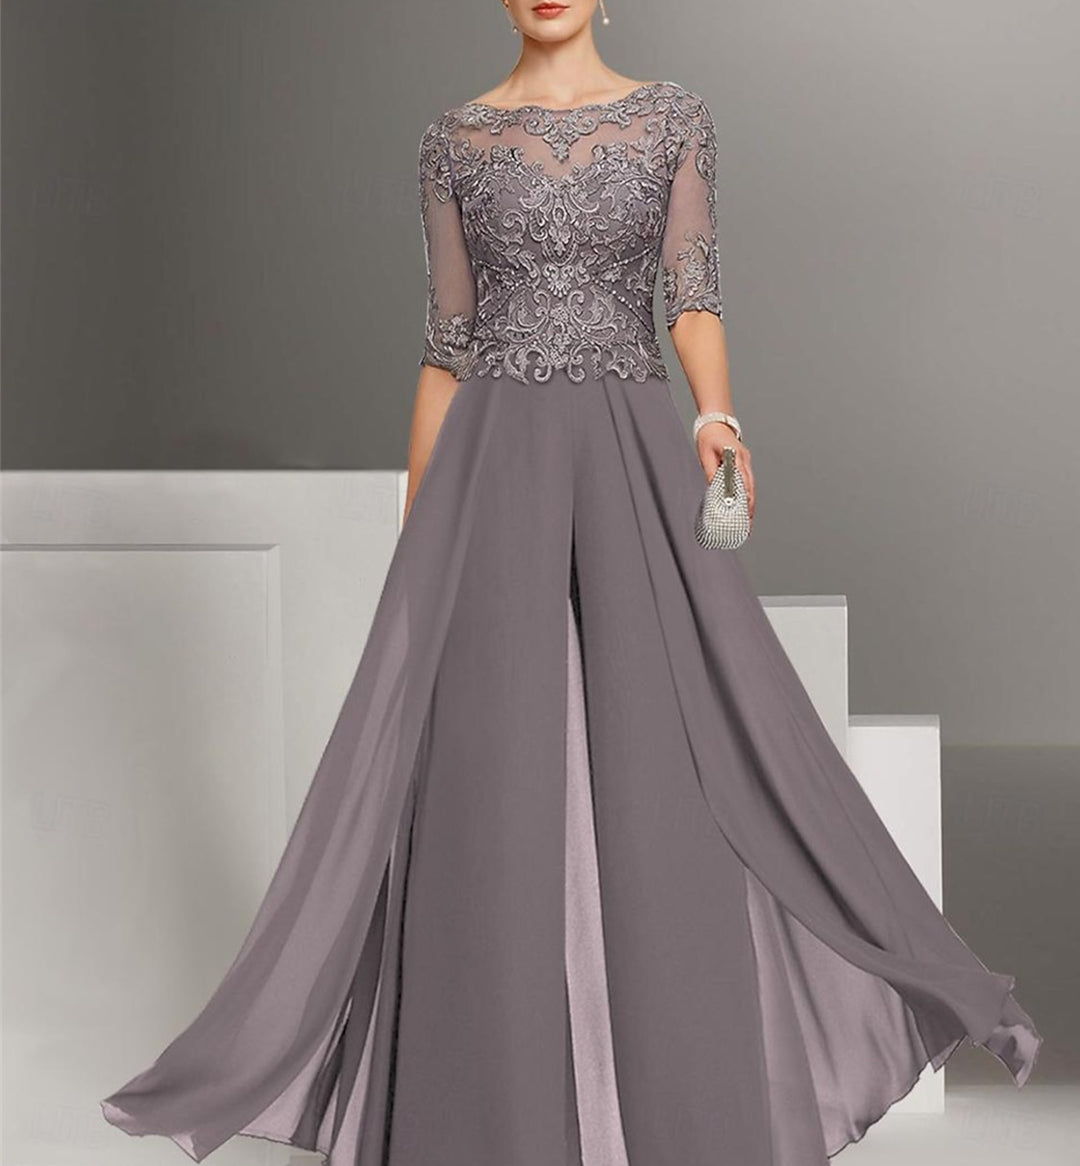 Chiffon half Sleeves Mother of the Bride Pantsuits with Lace